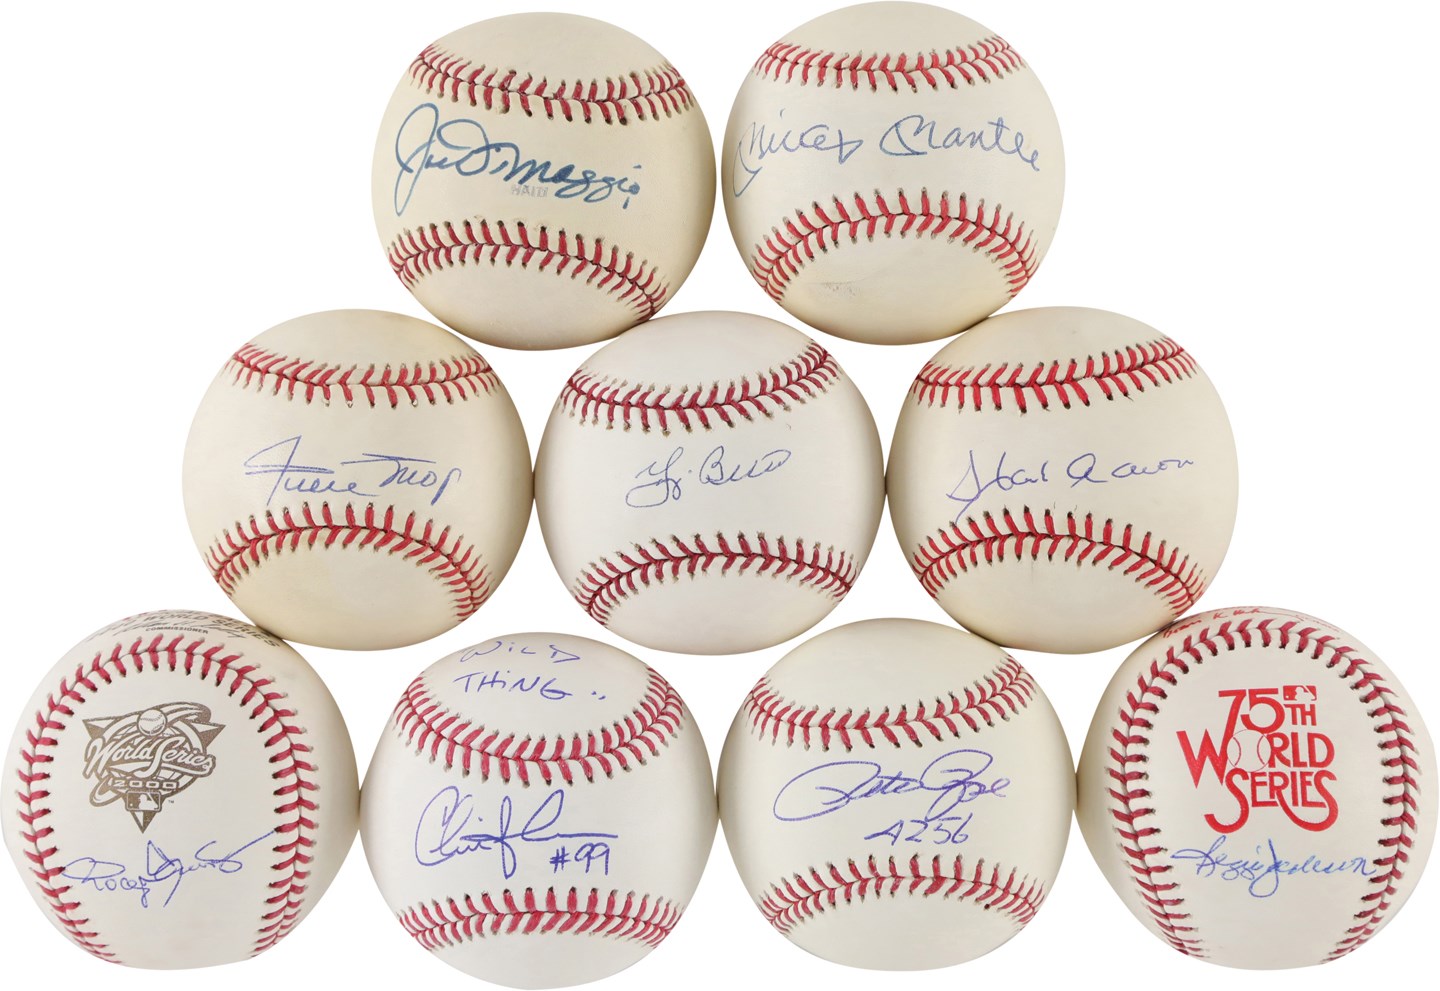 Hall of Famers and Stars Single Signed Baseballs w/Mantle & DiMaggio (9)